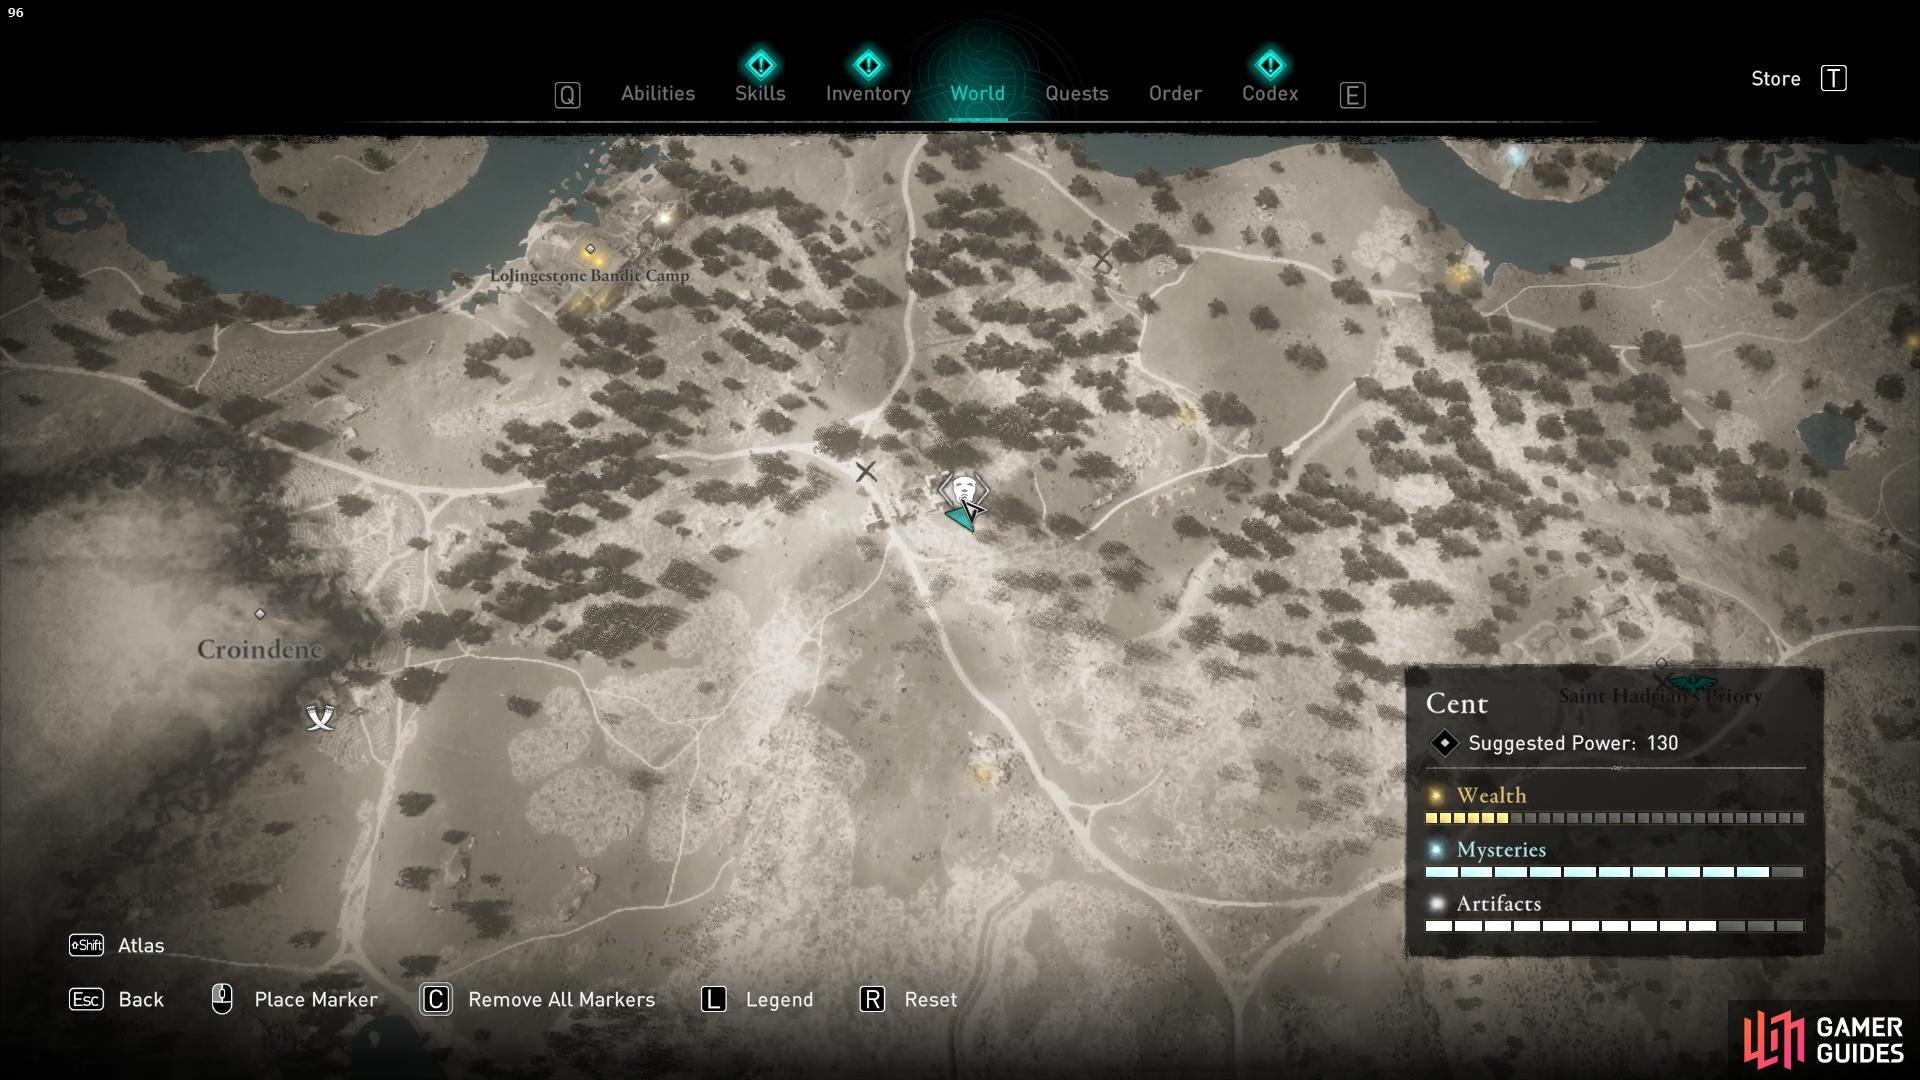 This Roman Artifact can be found southeast of the Lolingestone Bandit Camp